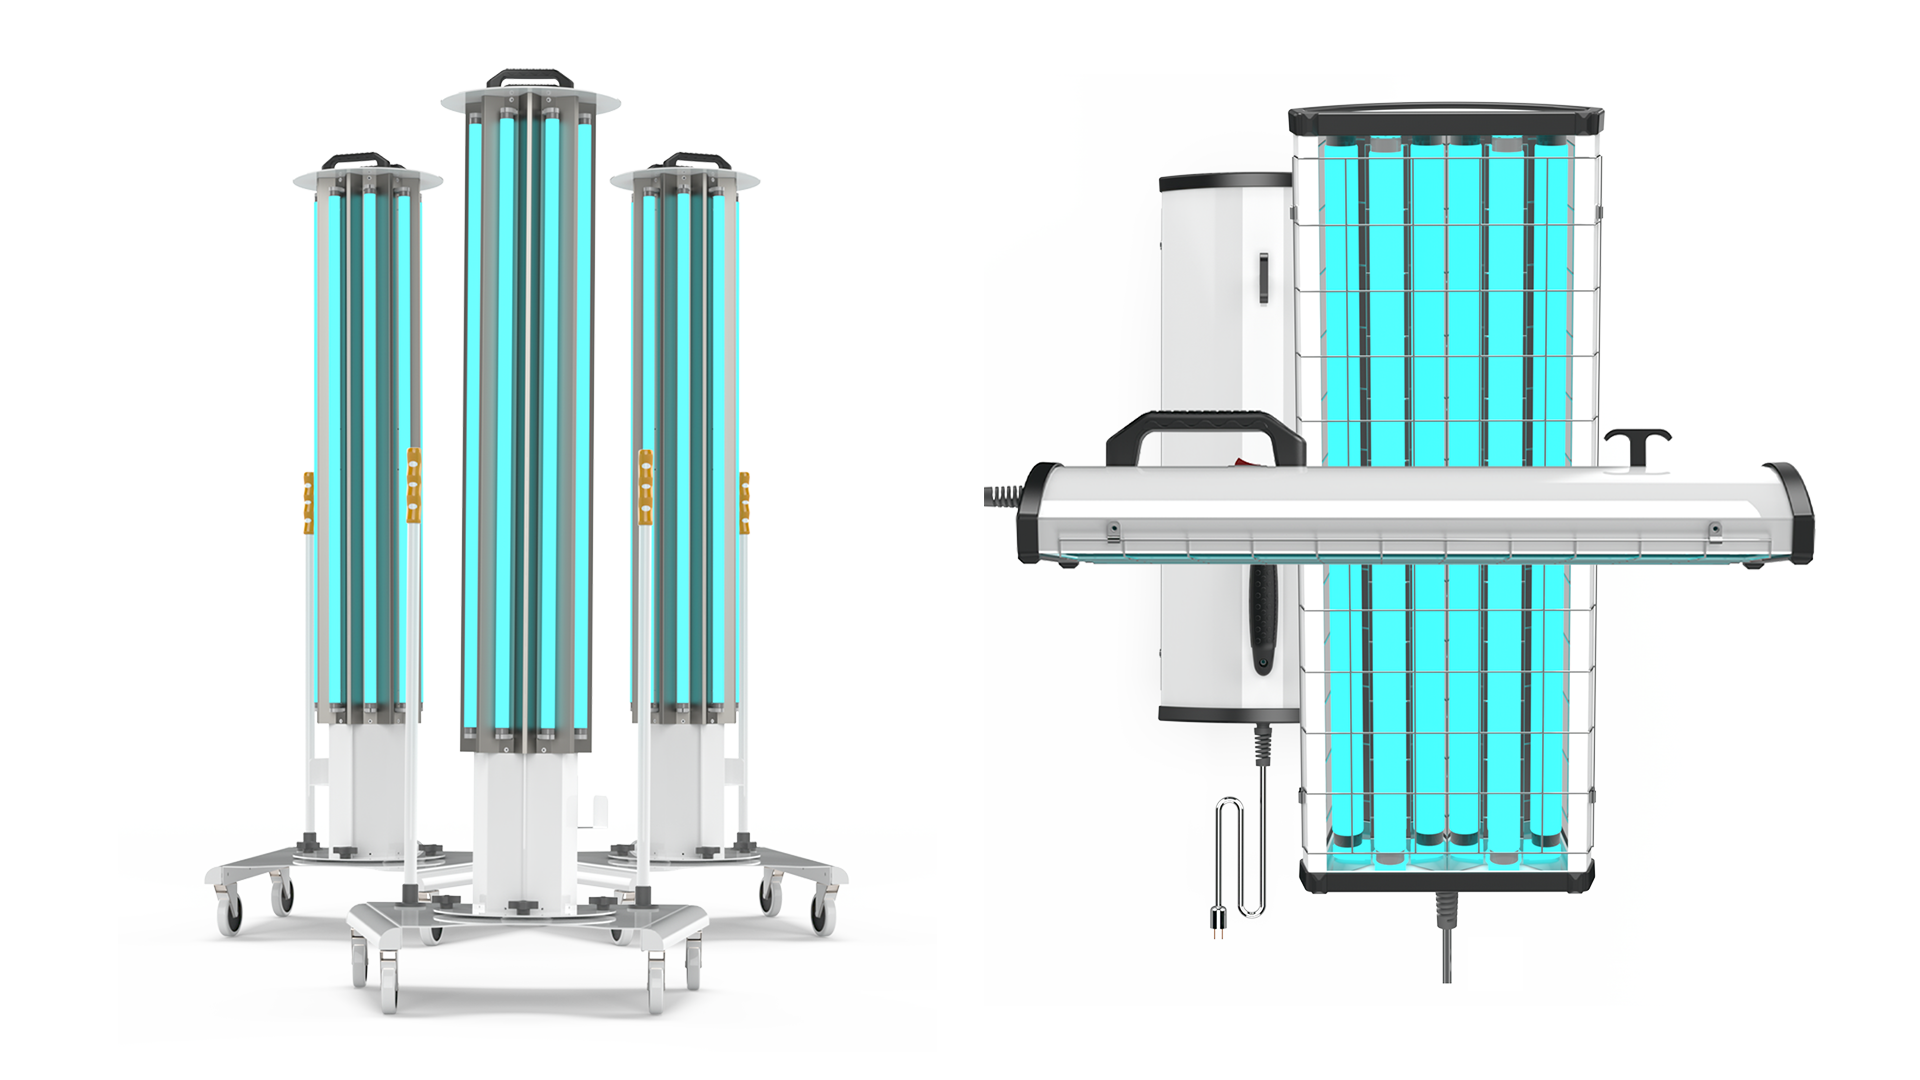 Introducing the UVC Light Disinfection System